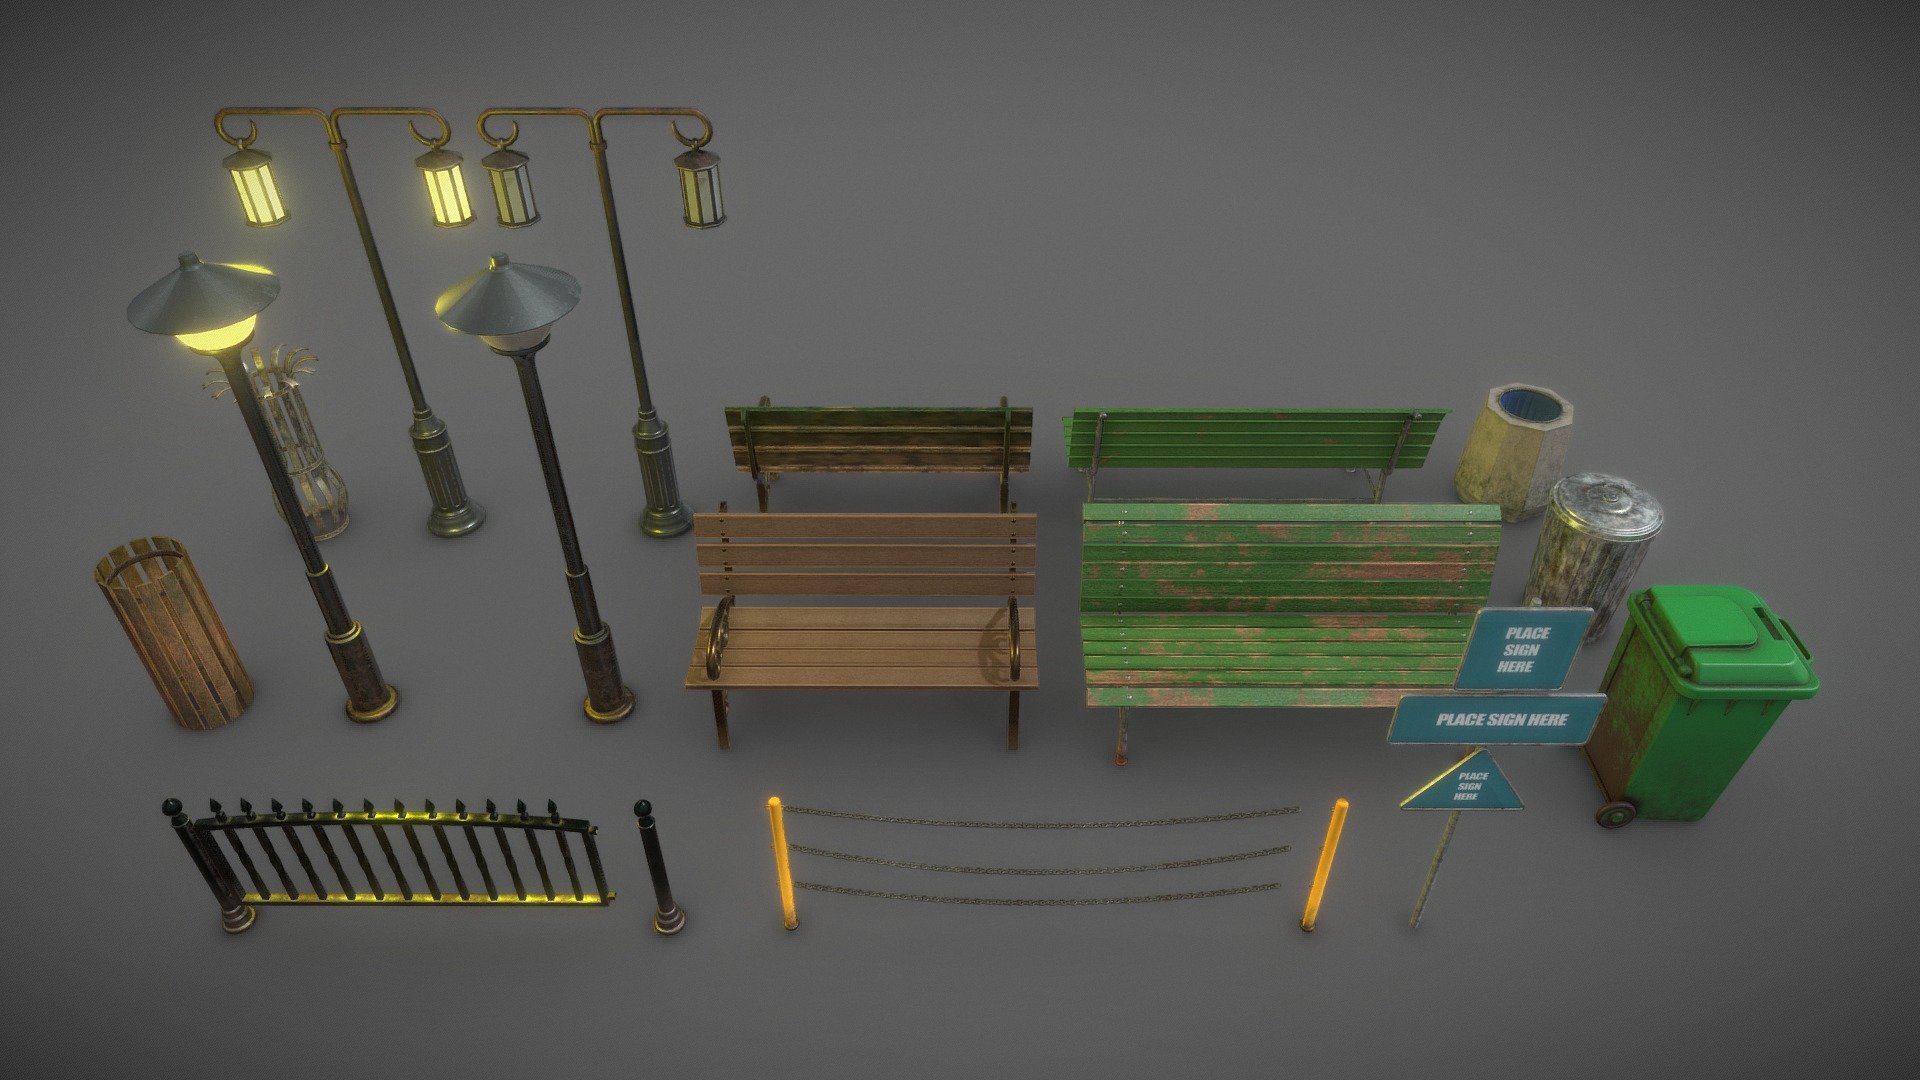 City Street &amp; Park Asset Pack. Volume 1
Includes:
3x Garbage Bin - 2k Textures
2x Bench ( 2 versions ) - 2k Textures
2x Street Lamp ( ON  OFF versions ) - 2k Textures
2x Tree Cover - 2k Textures
2x Fences with endings - 2k Tekxtures
1x Sign ( with 3 different sign shapes ) - 2k Texures - AssetPack: City Street & Park props vol.1 - Buy Royalty Free 3D model by MarcinGArt (@marcin.gk) 3d model